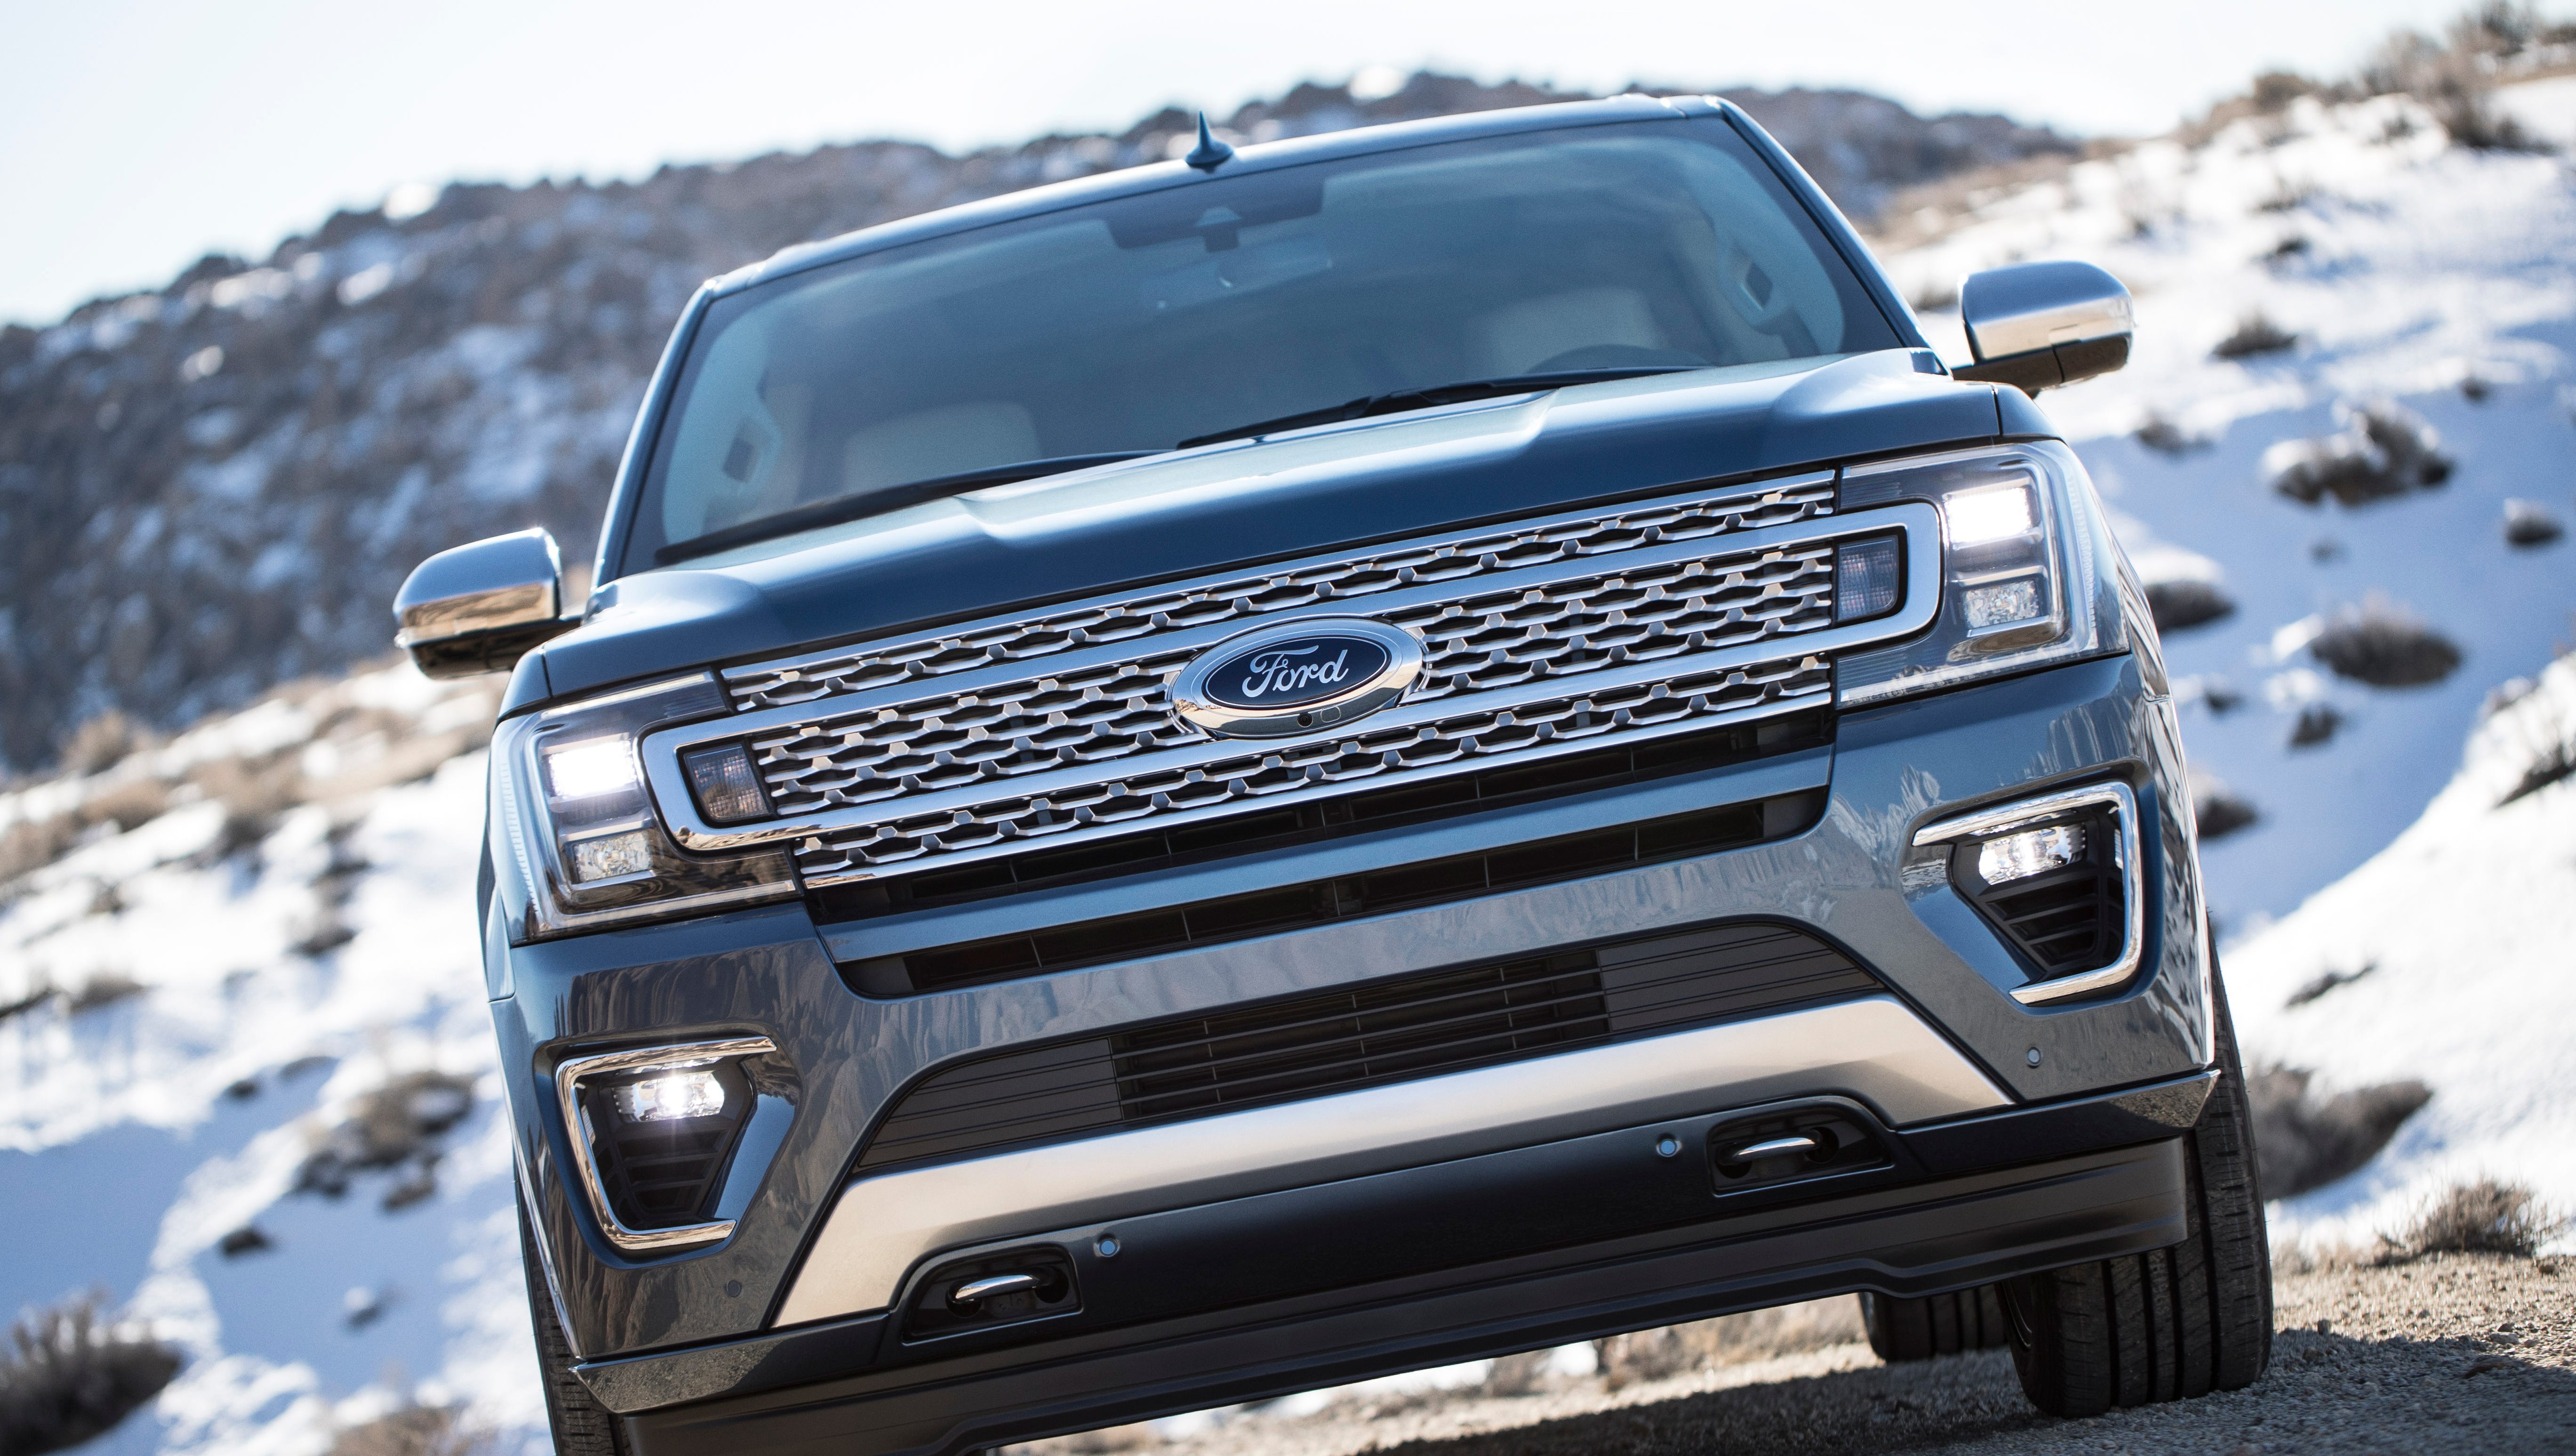 Ford's 2018 Expedition is 1st big SUV overhaul in 15 years